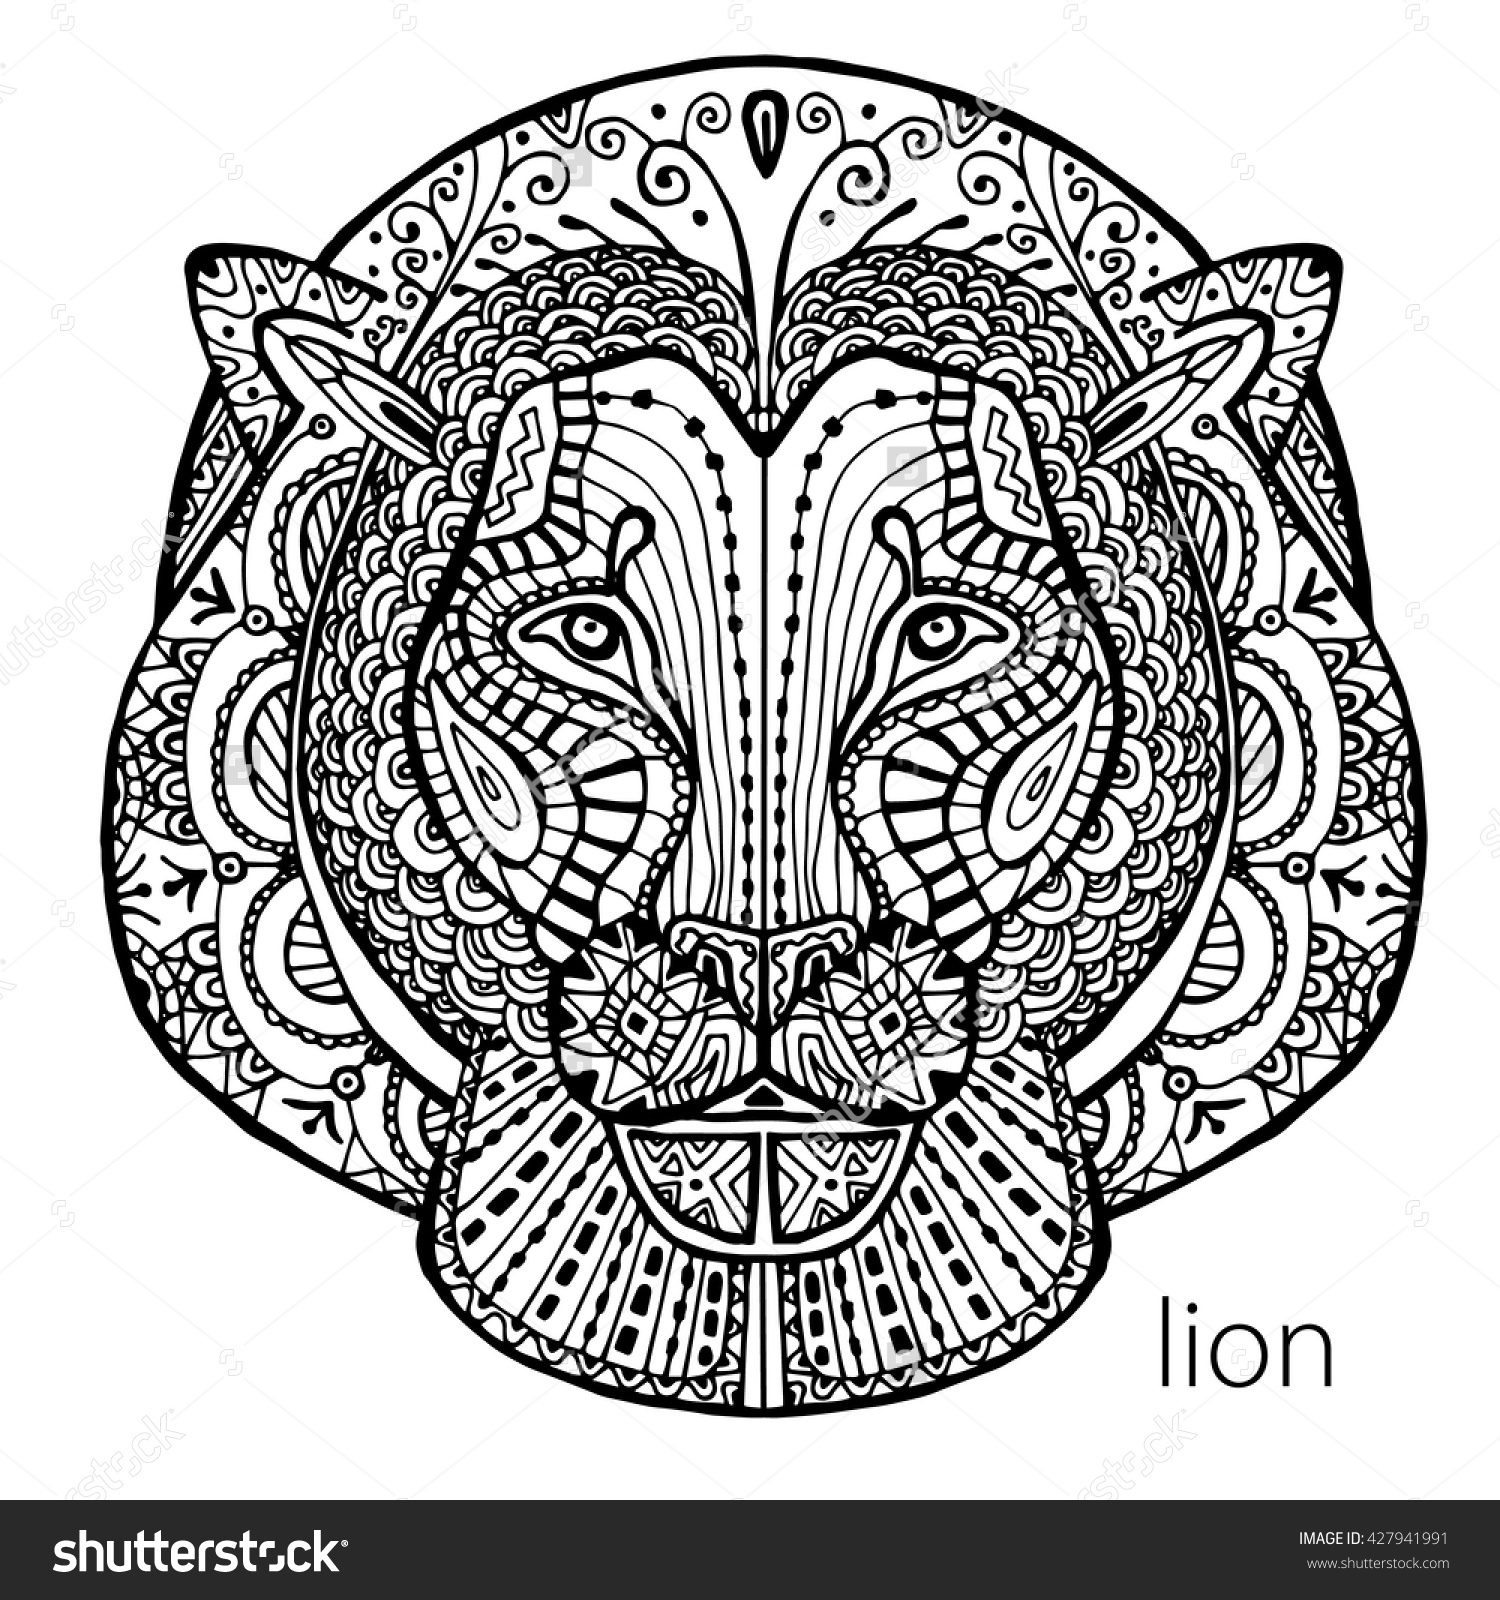 White Lion coloring, Download White Lion coloring for free 2019